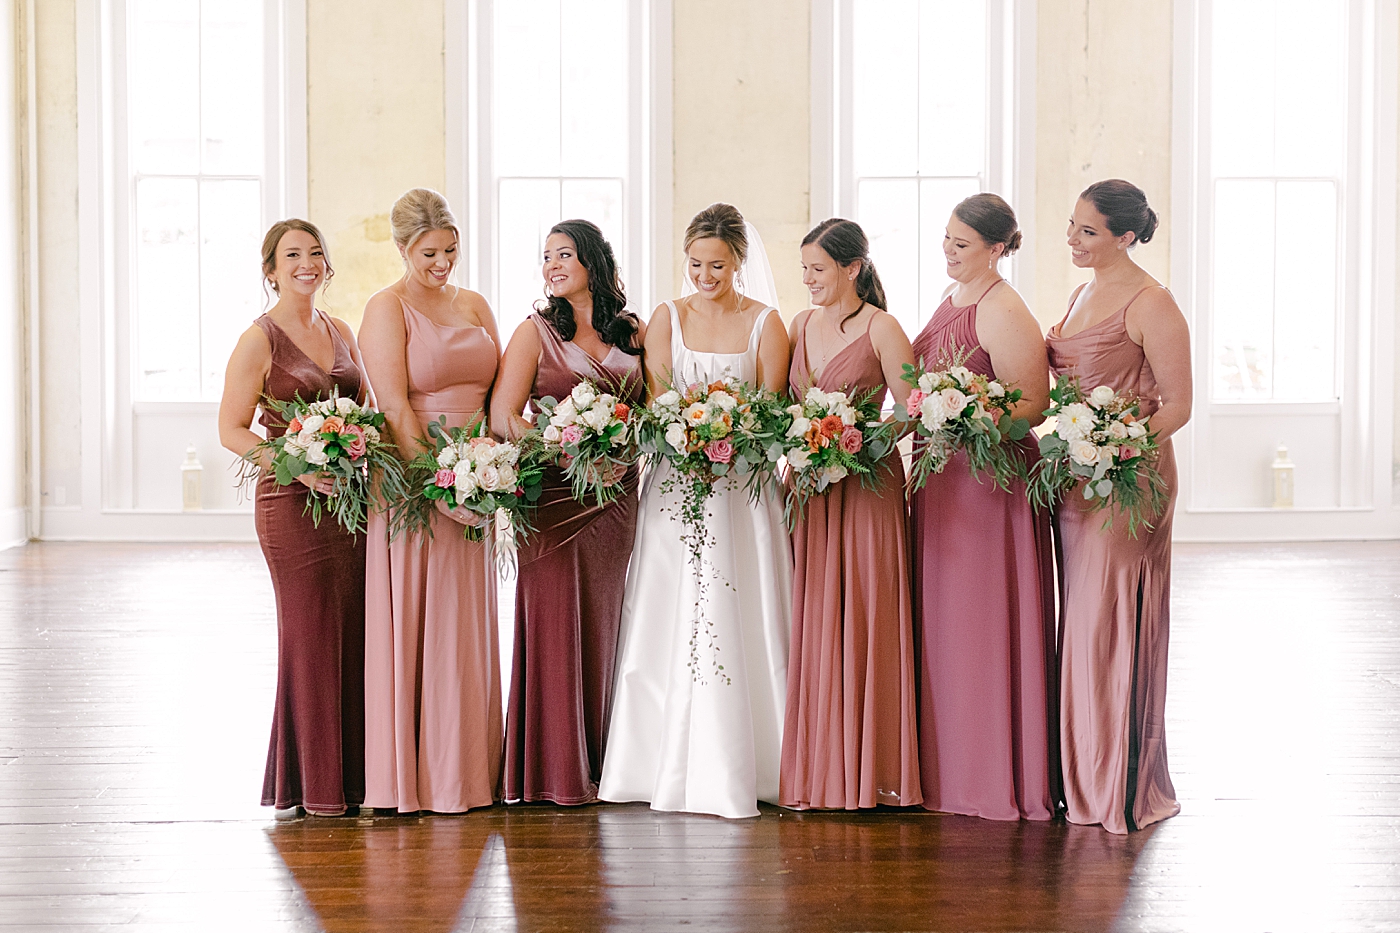 Bride with her bridesmaids and their flowers | Photo by Hope Helmuth Photography